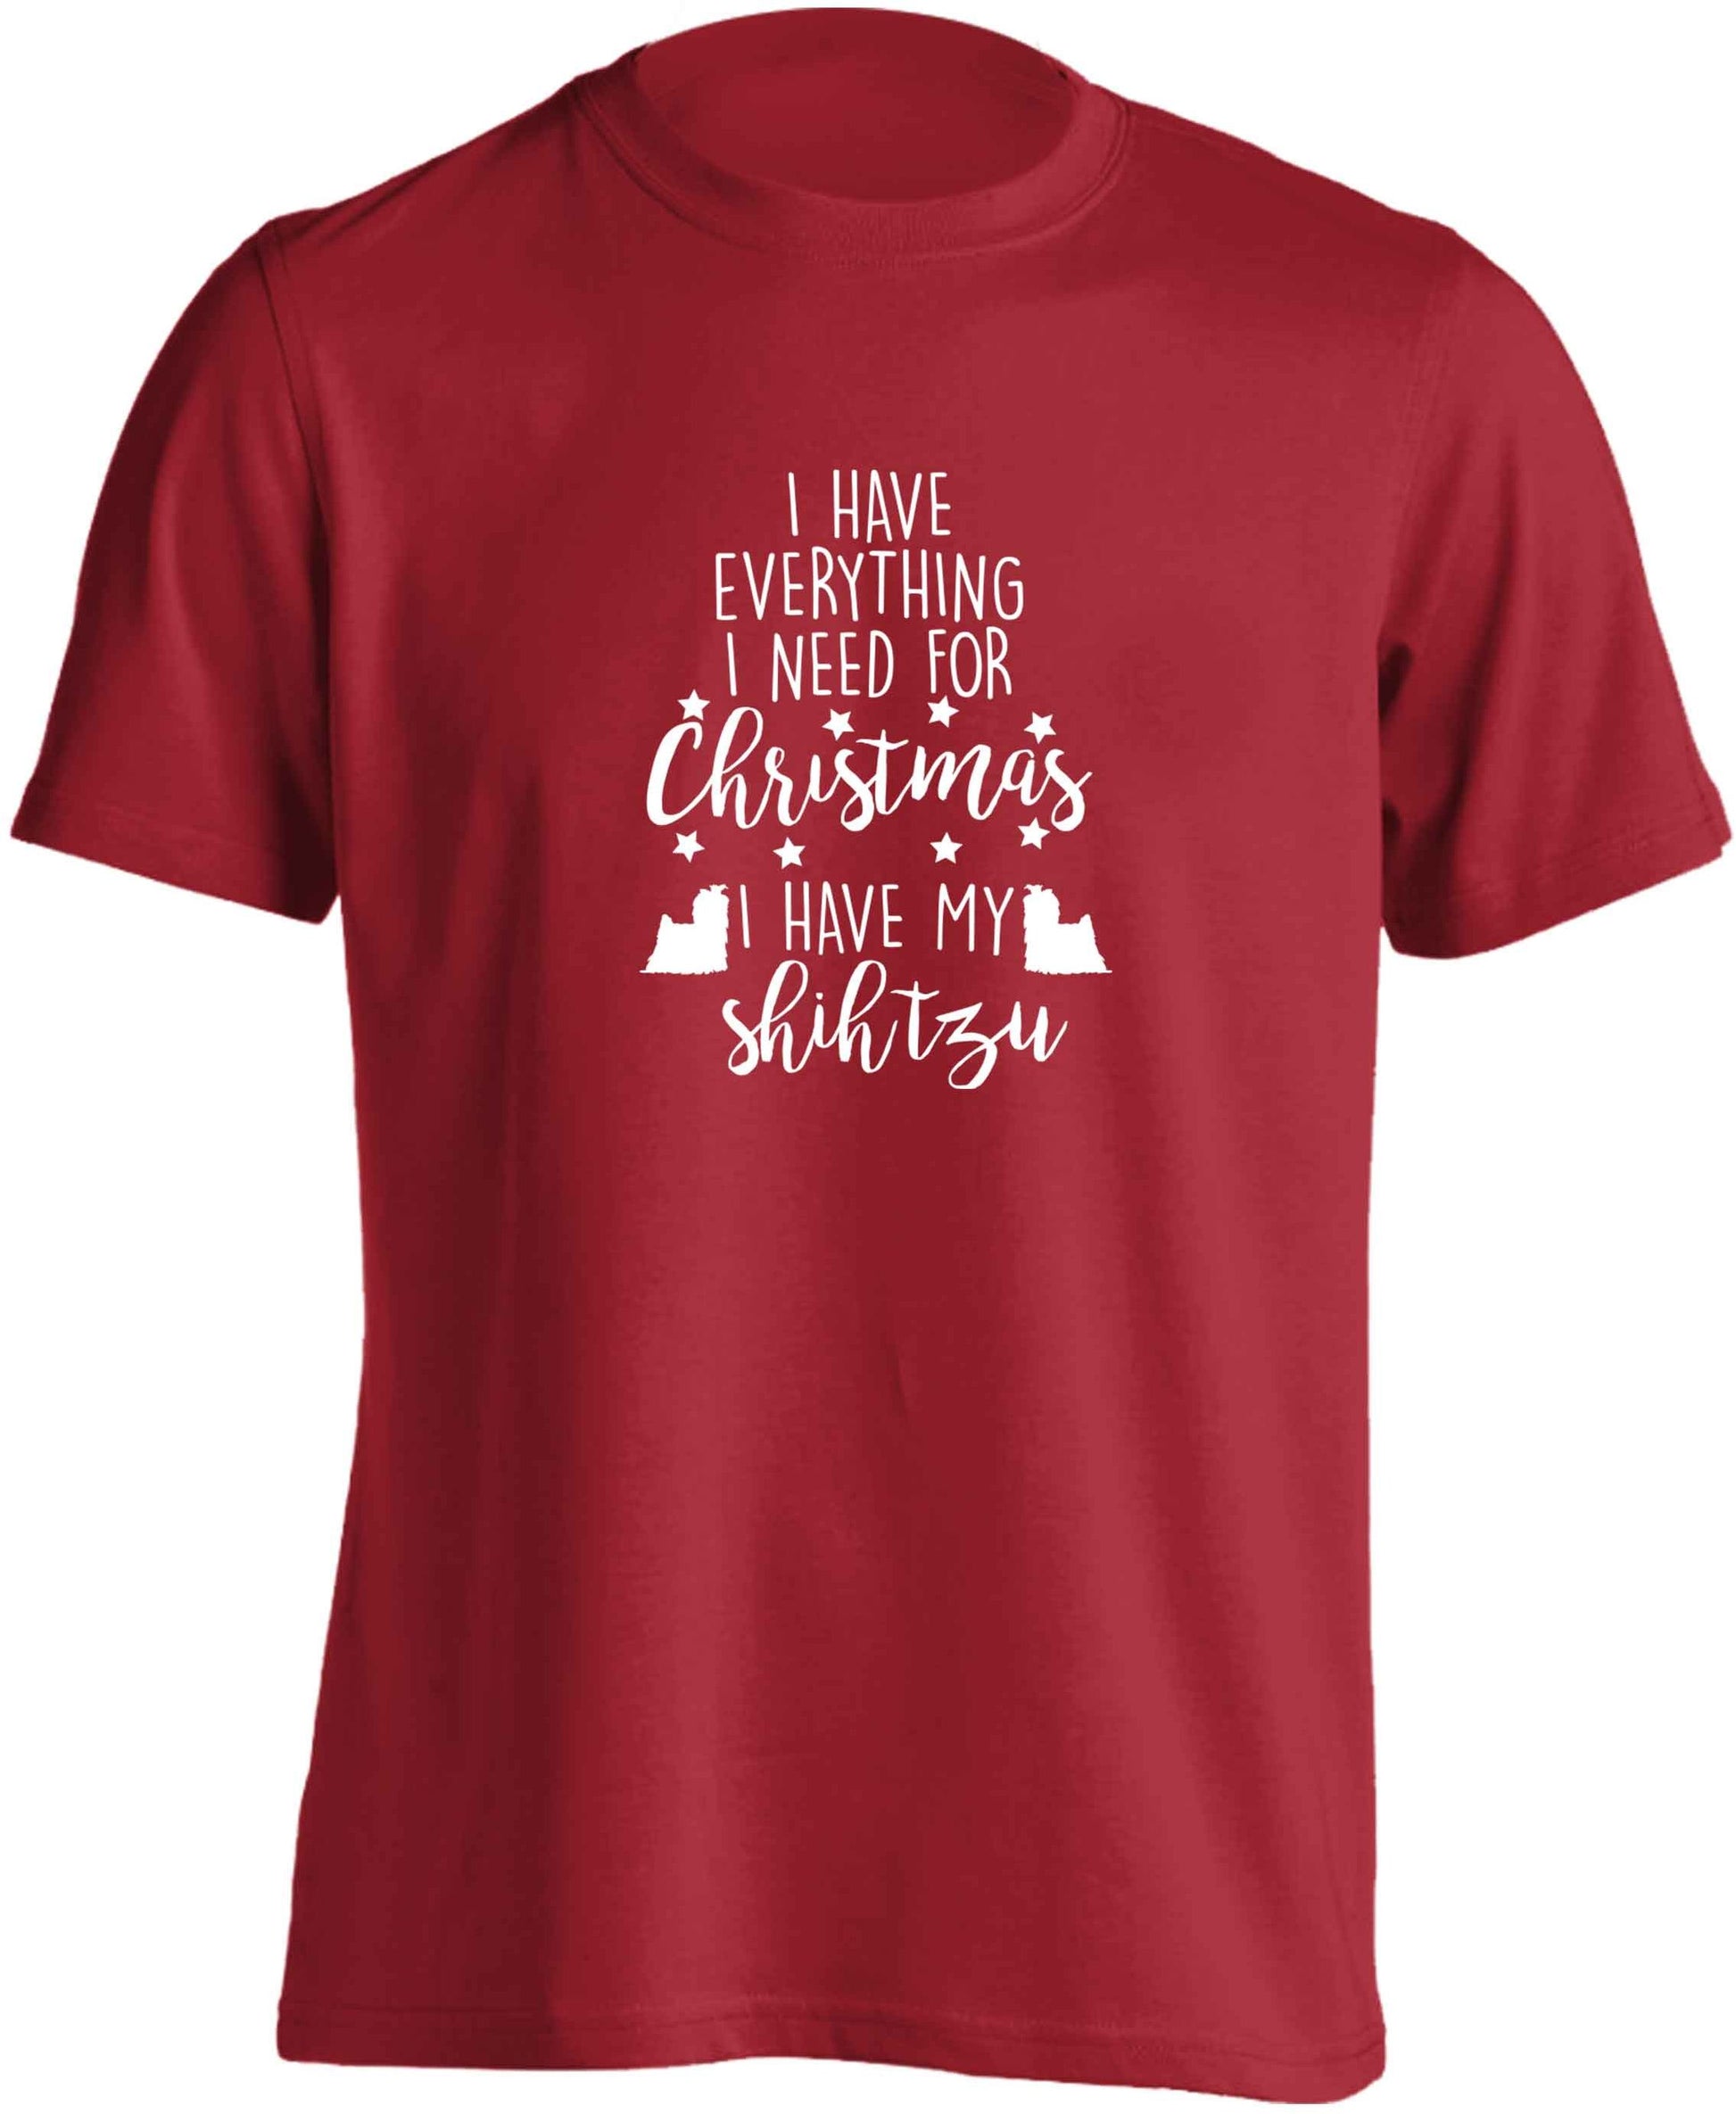 I have everything I need for Christmas I have my shih tzu adults unisex red Tshirt 2XL